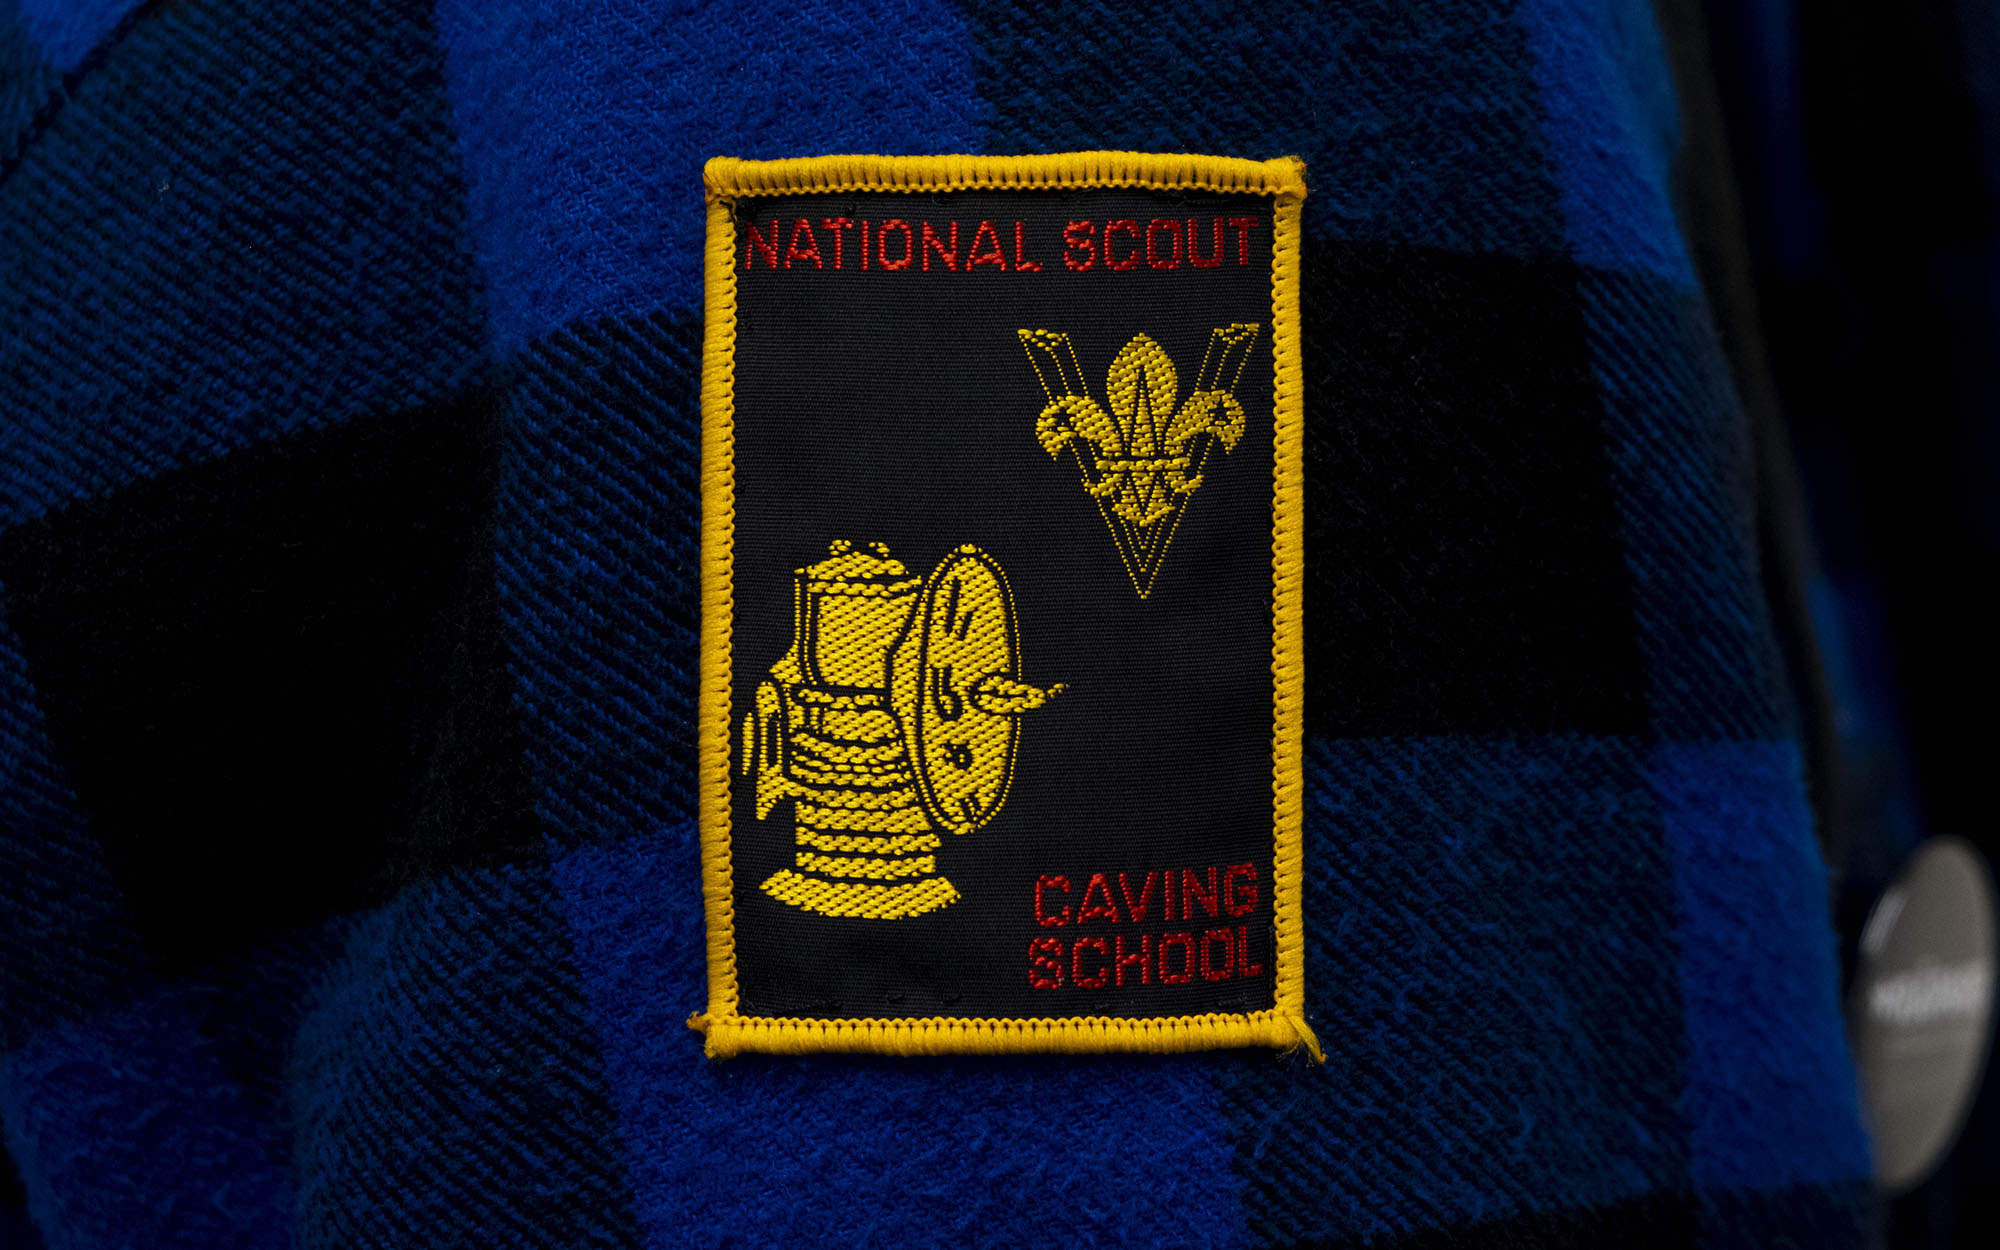 A badge sewn onto a black and blue checked woollen jacket. The badge has a bright yellow border and says "National scout, caving school" on it with a picture of a lantern and the Scouts logo